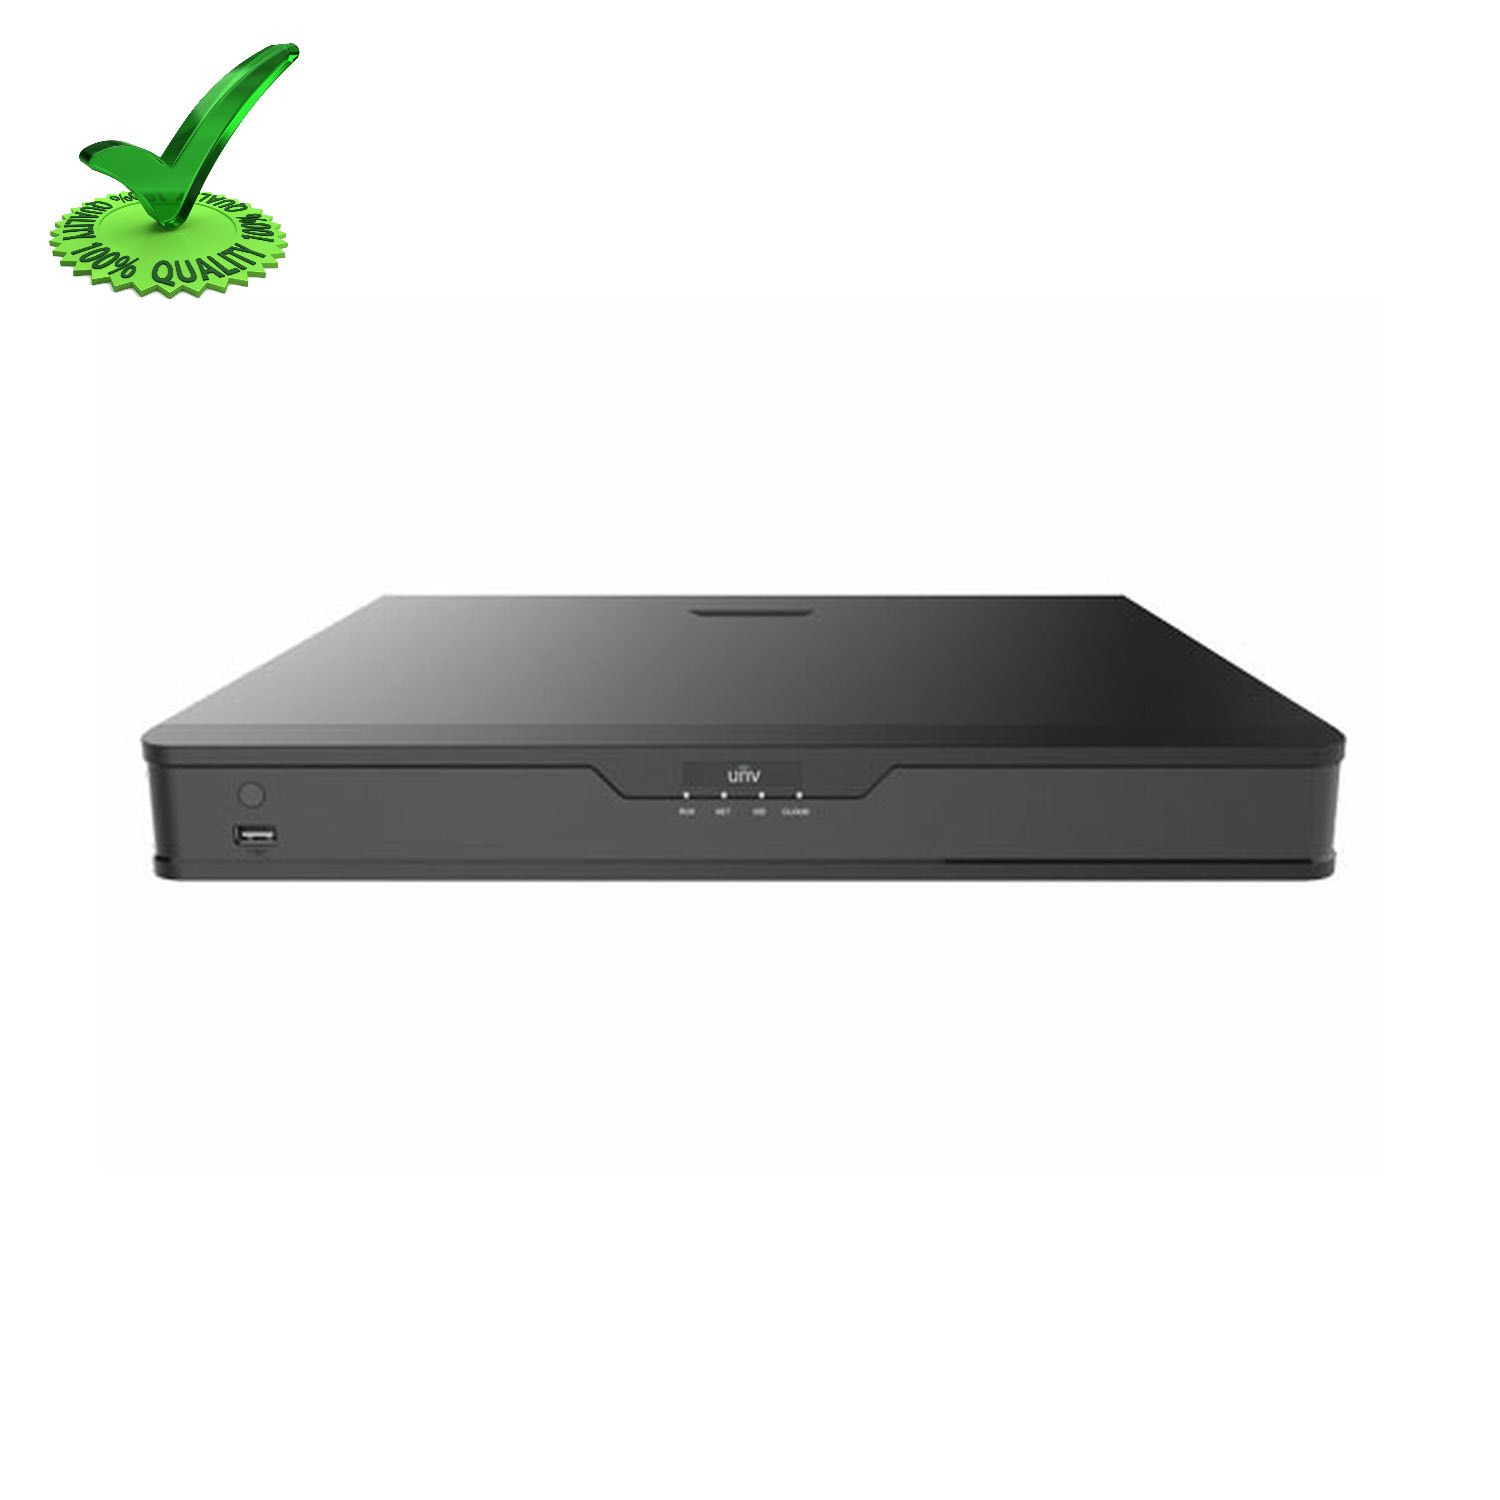 Uniview NVR302-16S 16Ch HD Network Video Recorder